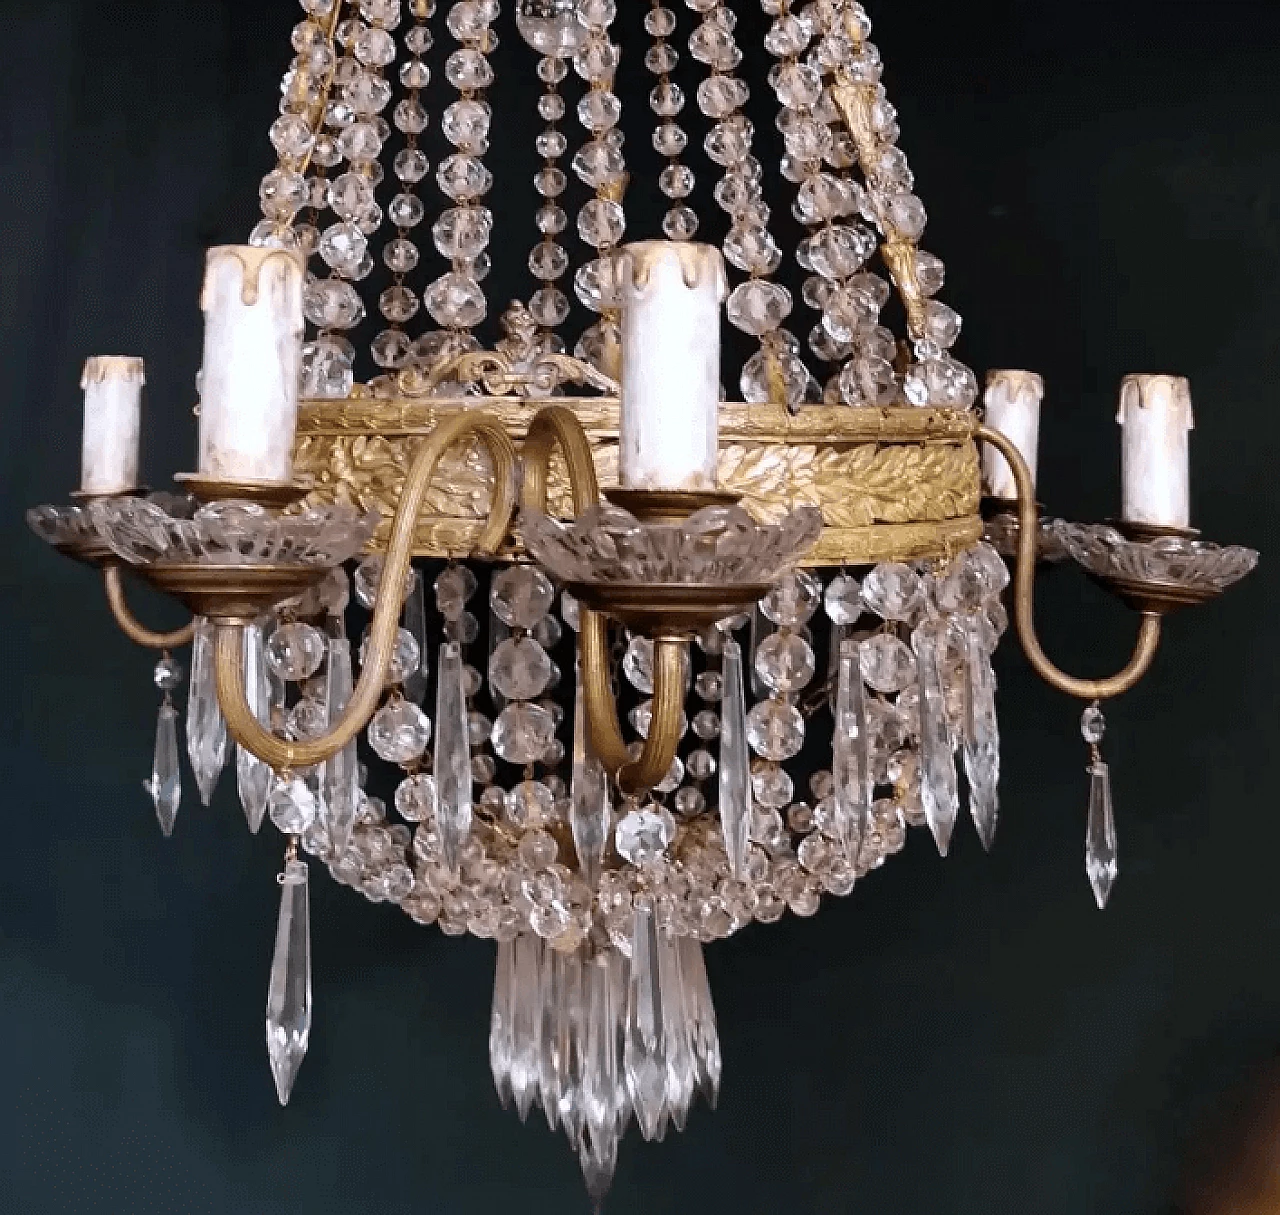 Louis XVI-style hot air balloon chandelier made of lead crystal and gilded brass, 17th century 5